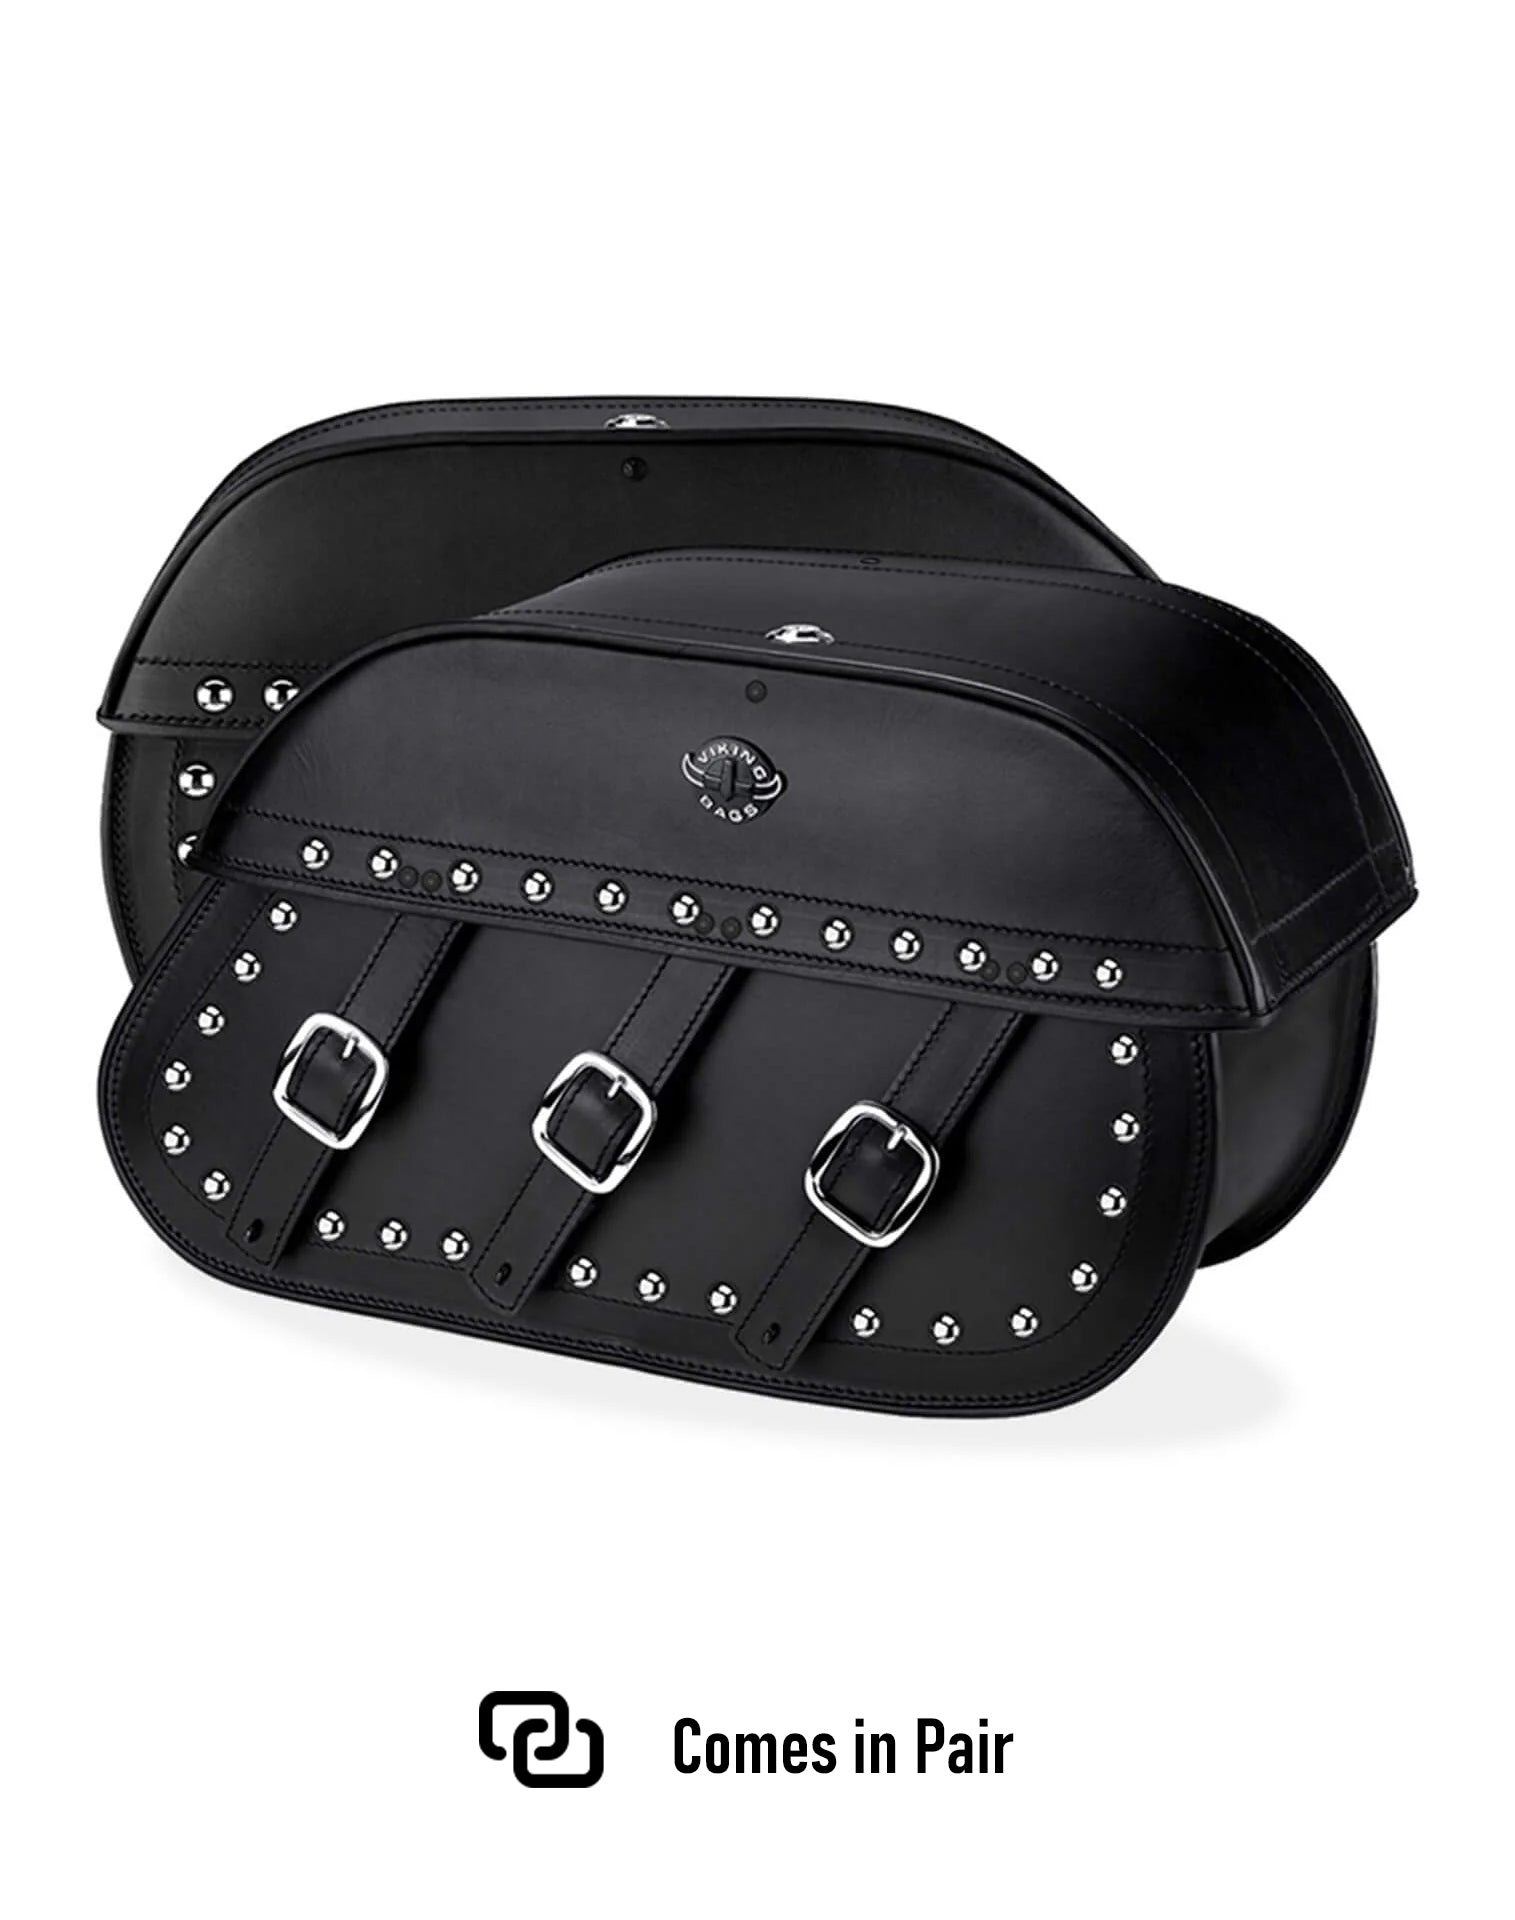 Viking Trianon Extra Large Studded Leather Motorcycle Saddlebags For Harley Softail Heritage Flst I C Ci can be easily installed